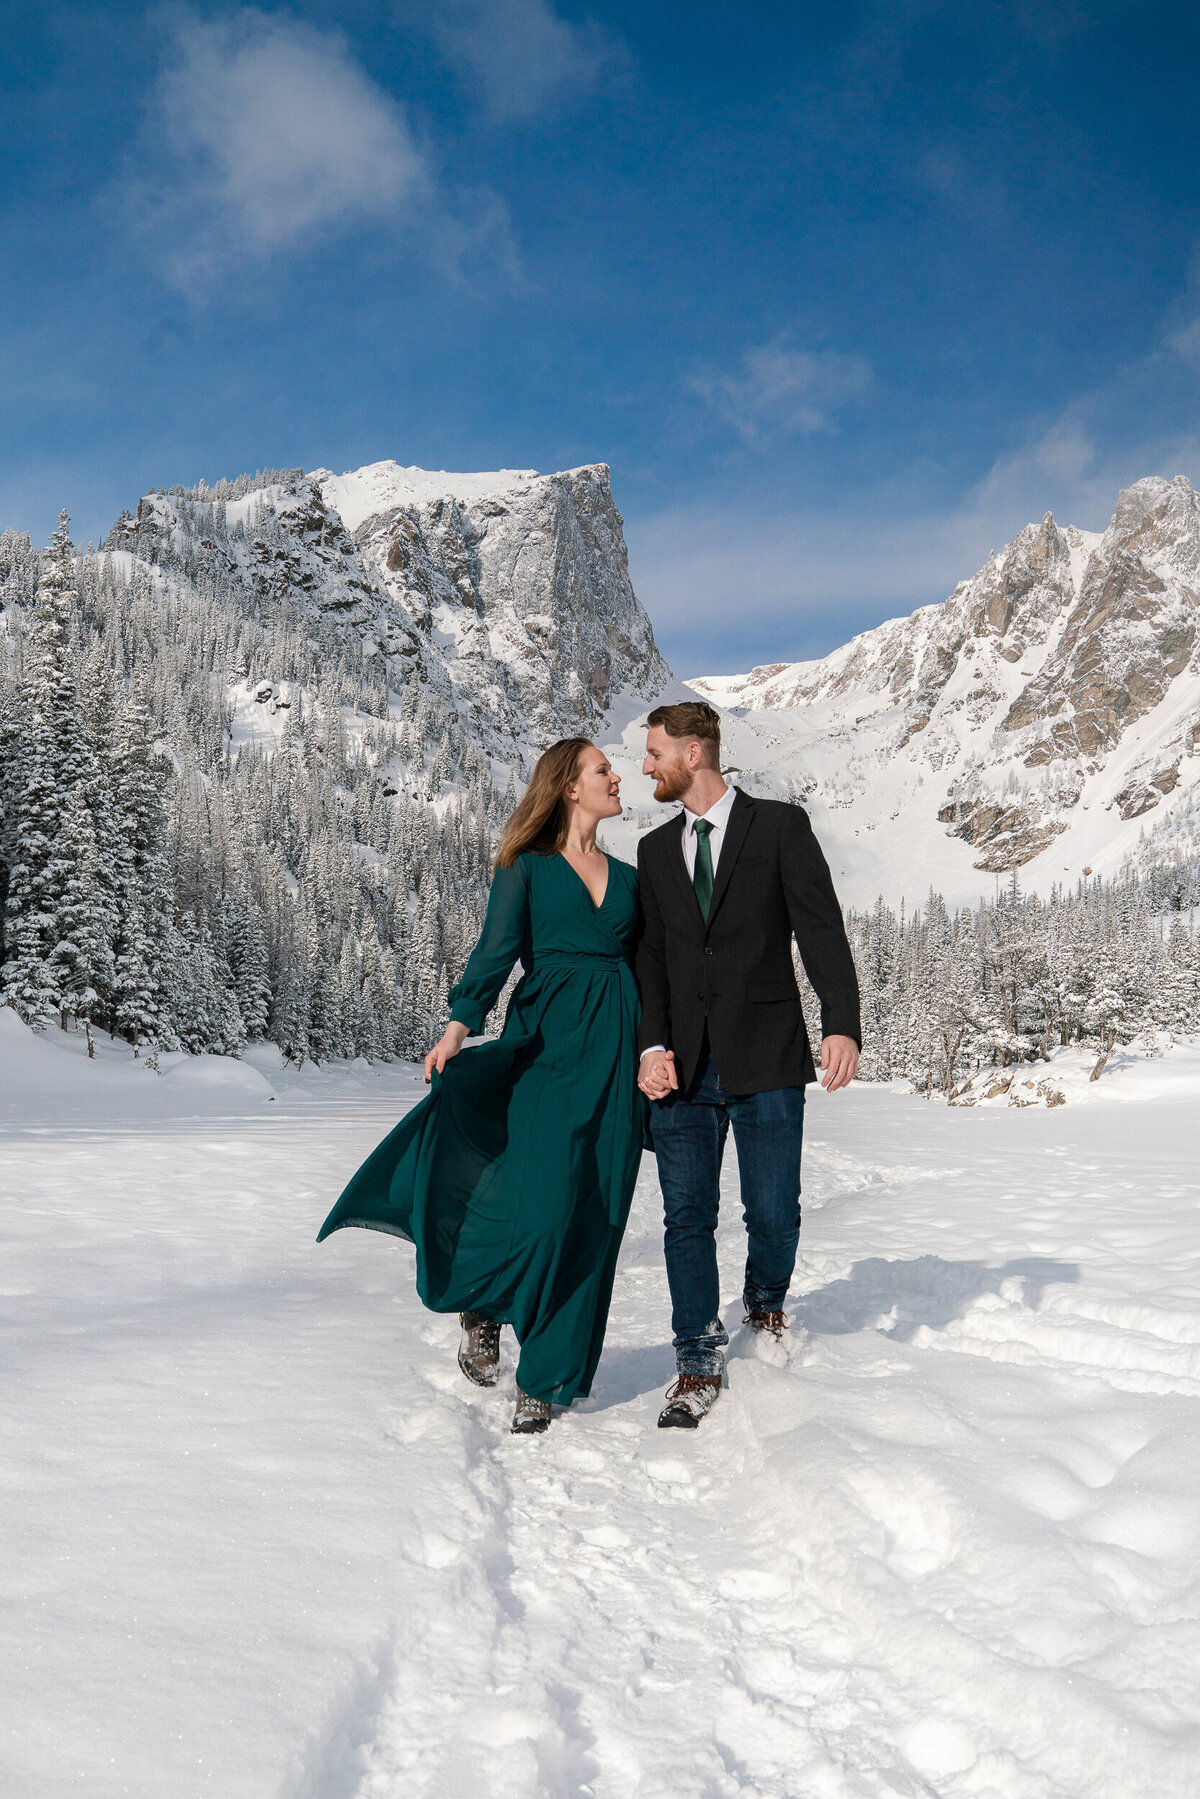 Man in suit and woman in green dress walk and smile in front of the Rocky Mountains.